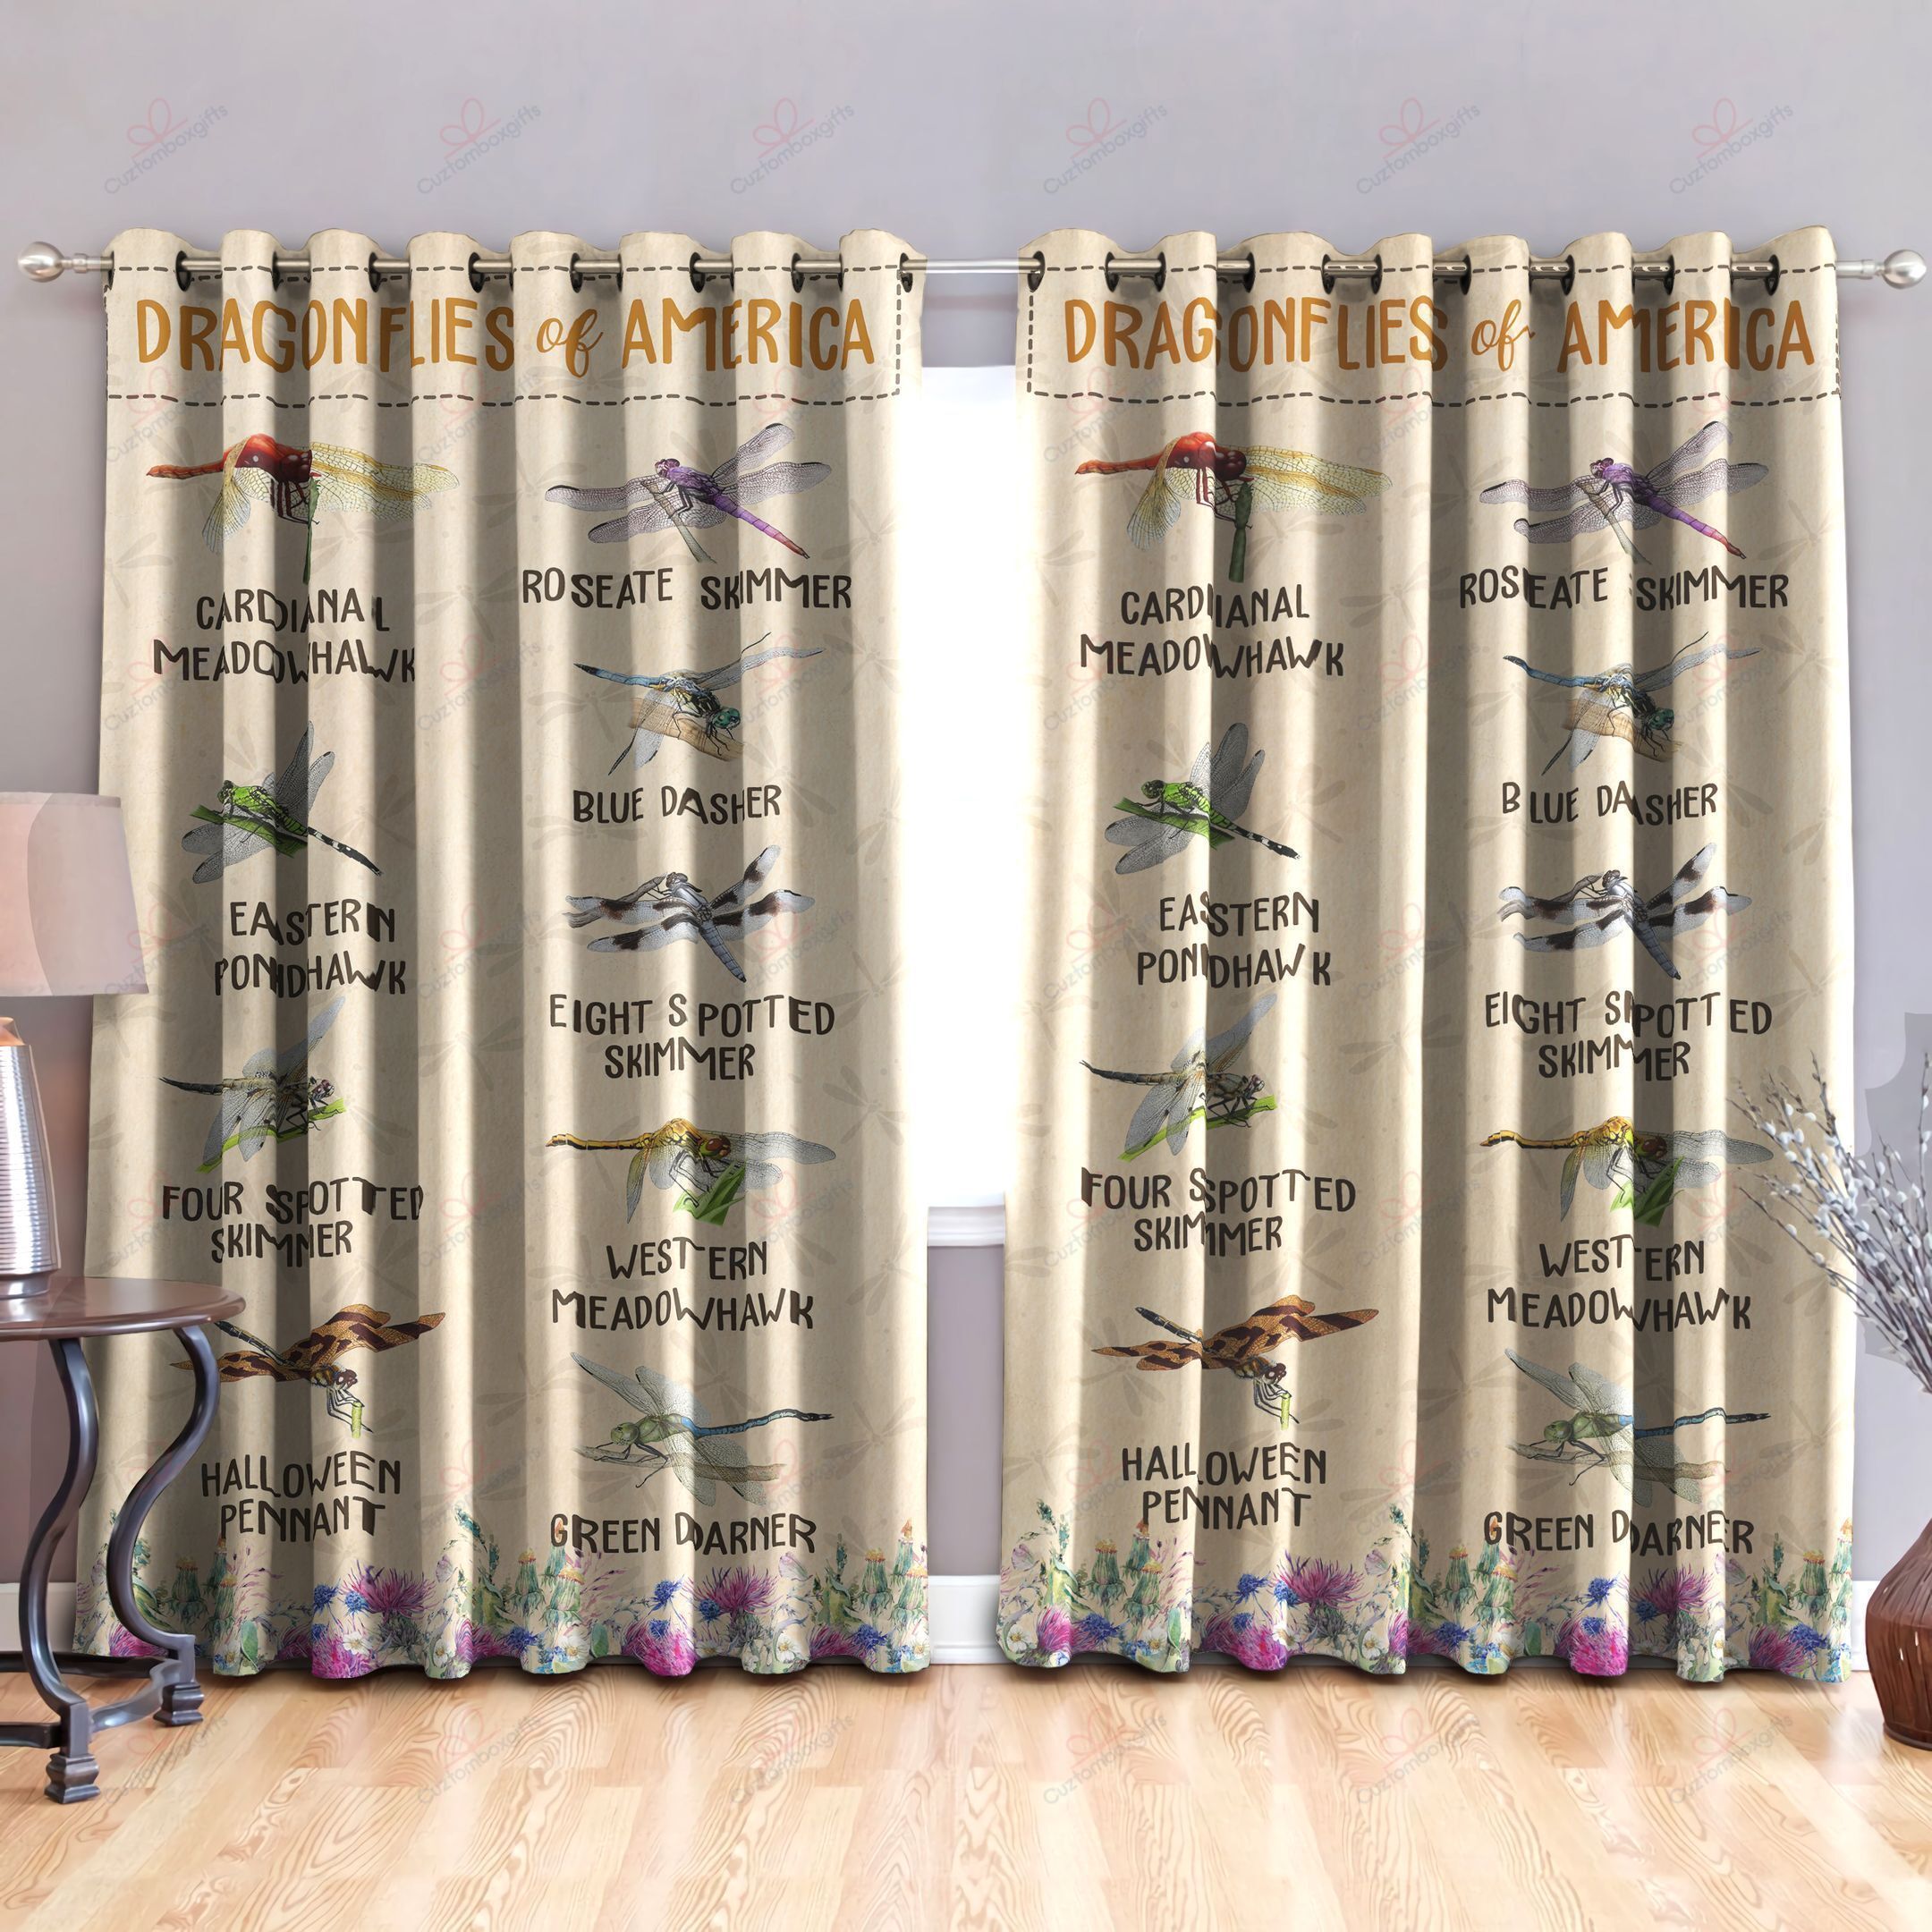 Dragonflies Of America Printed Window Curtain Home Decor